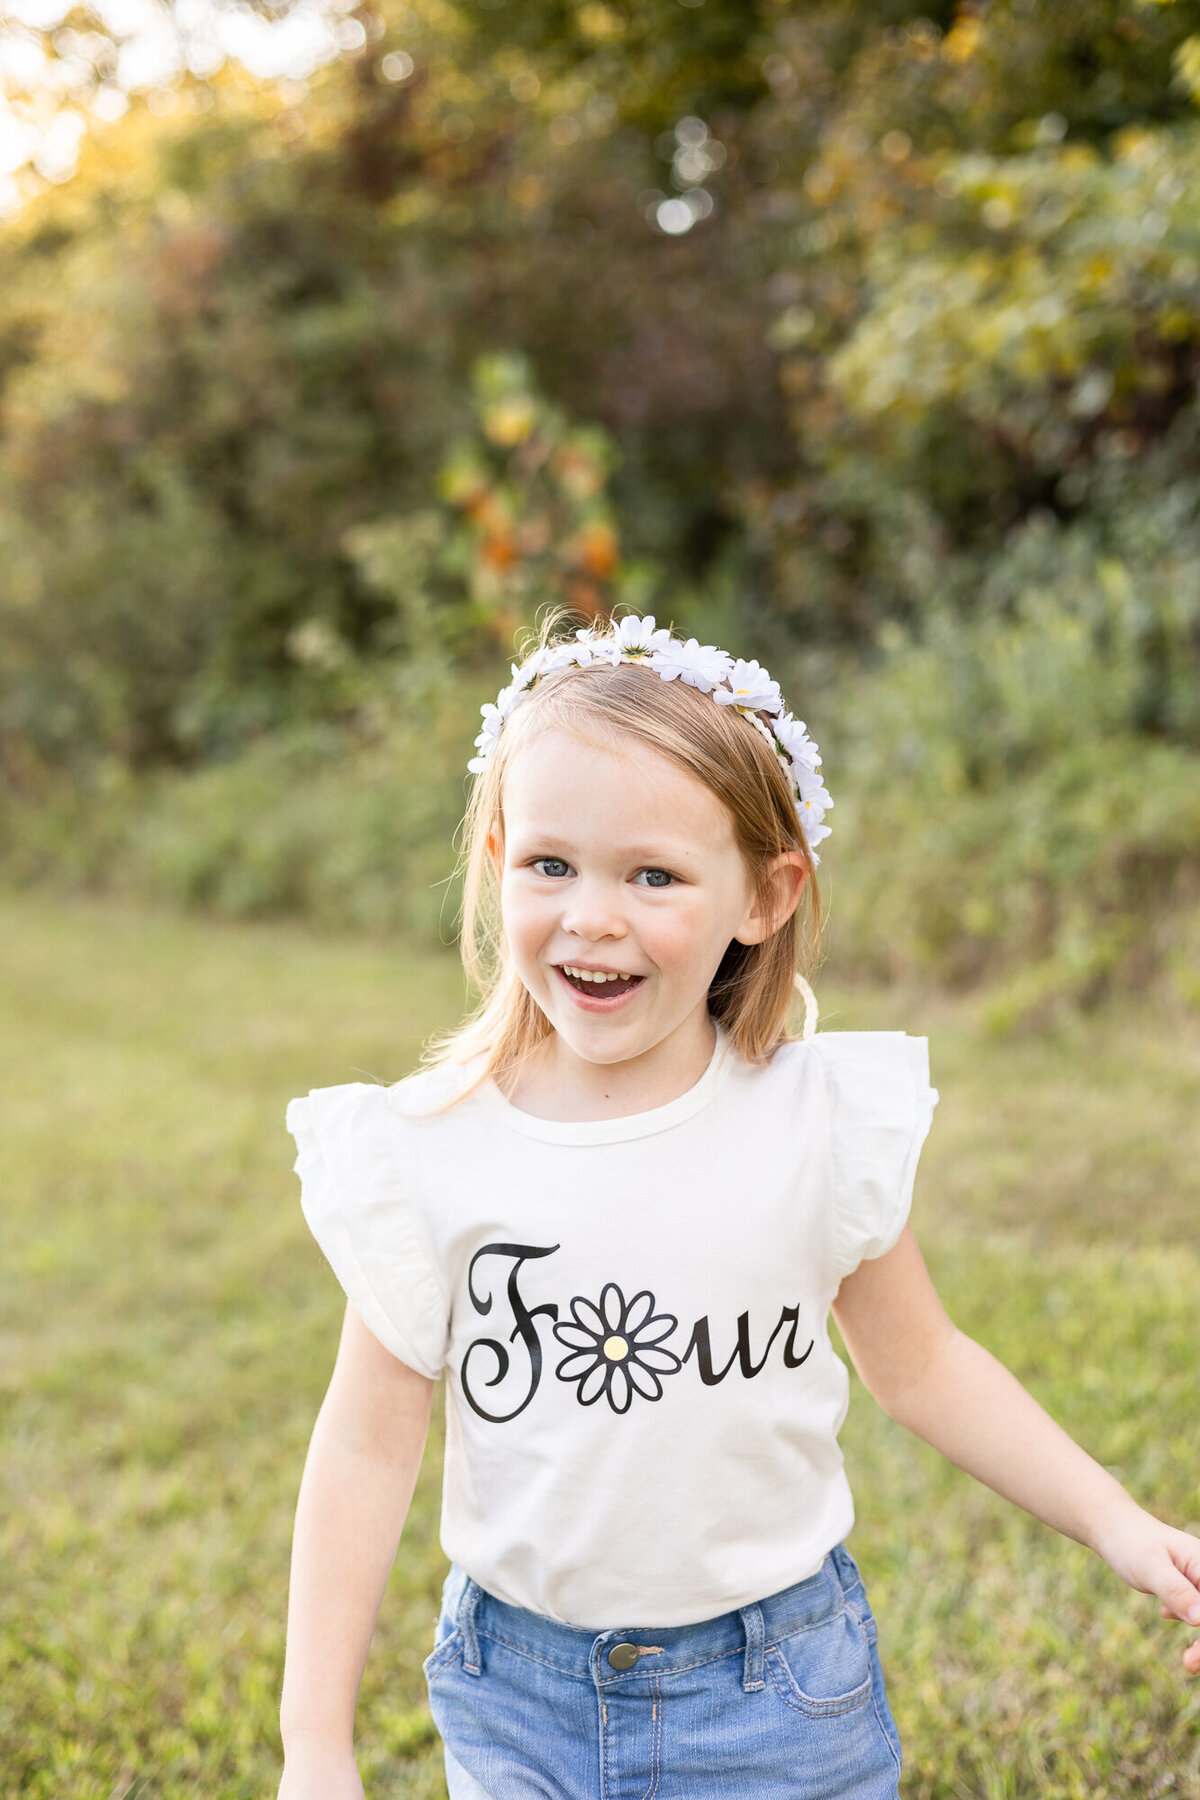 Outdoor-cake-smash-one-year-old-milestone-photography-session-Frankfort-KY-photographer-4